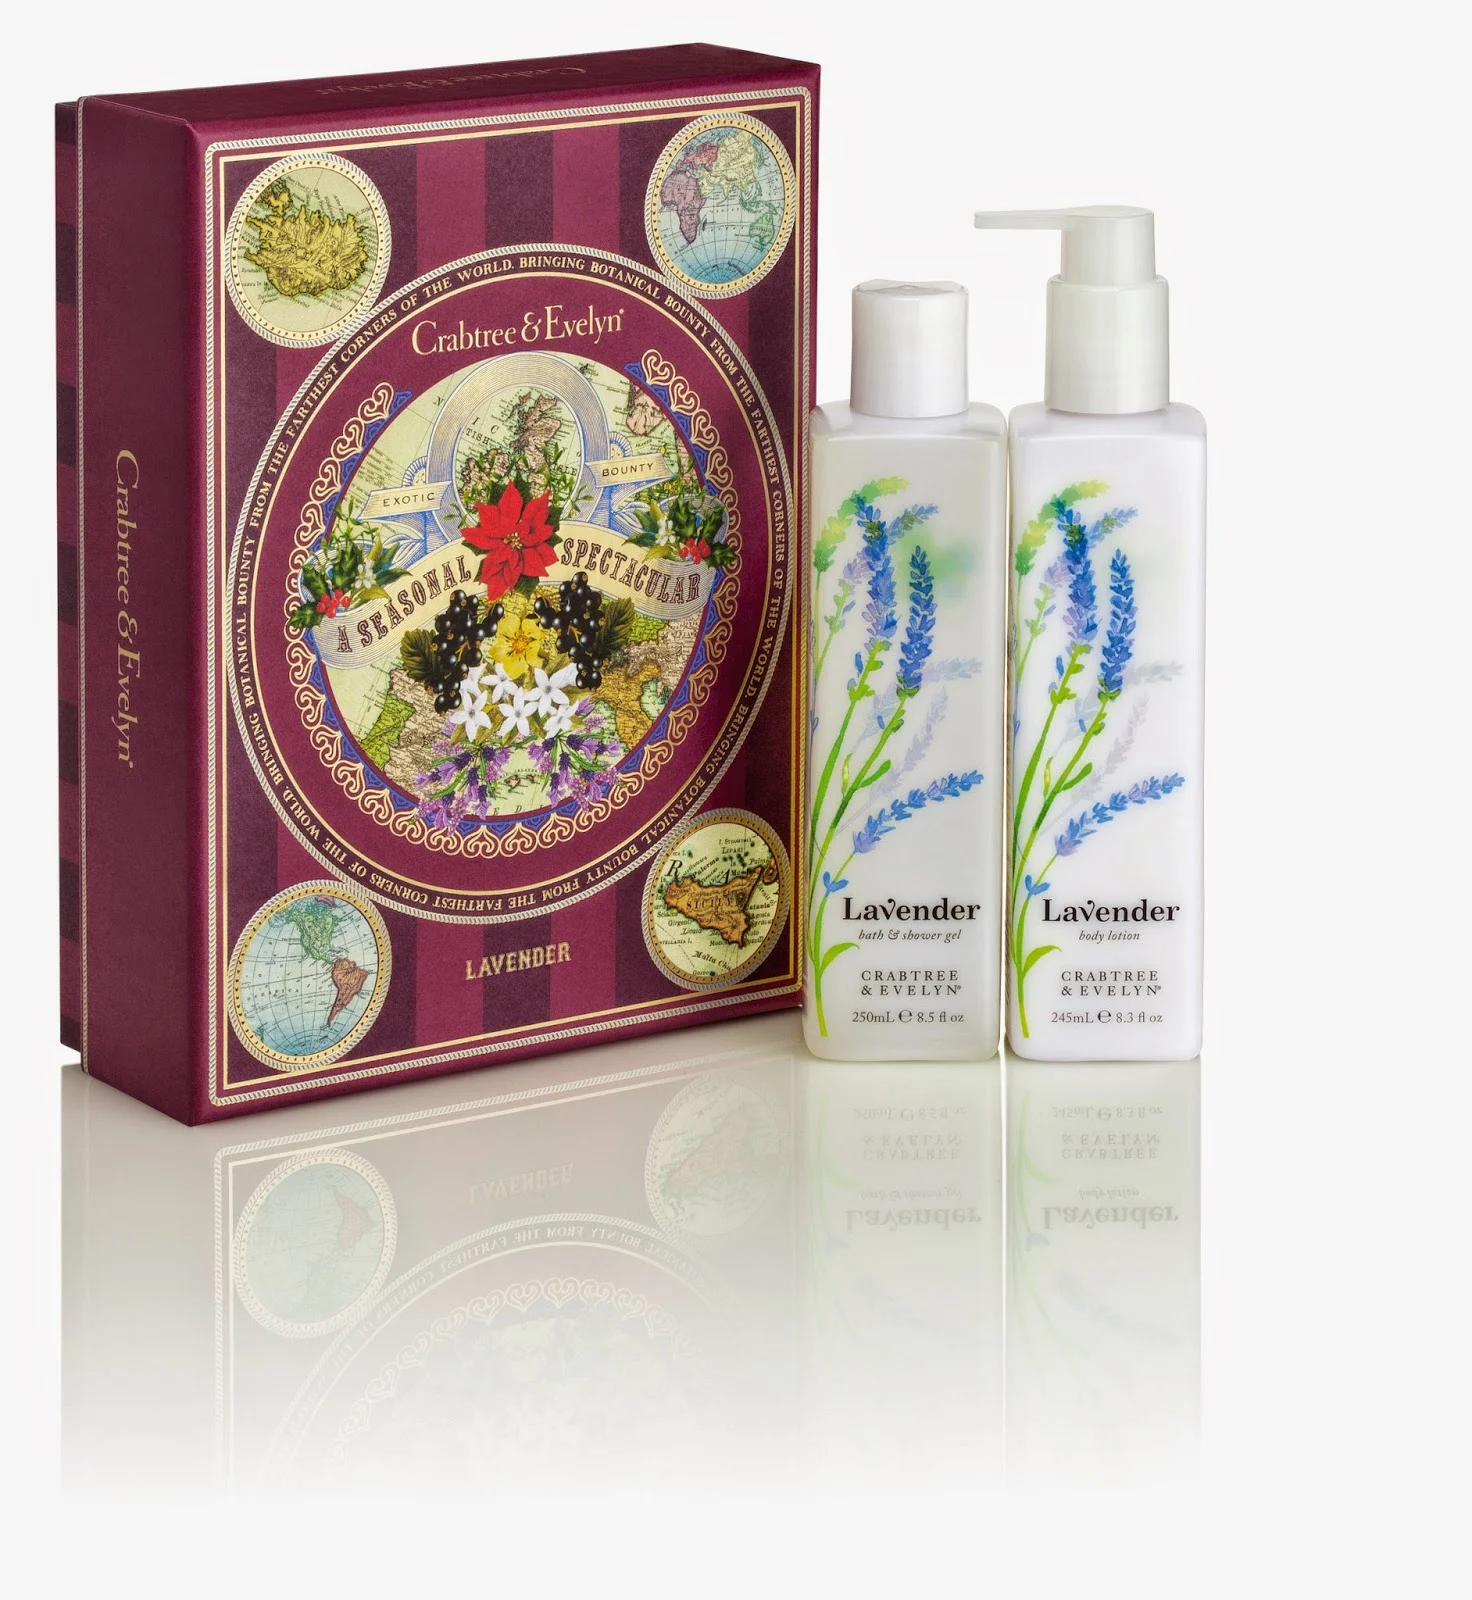 Crabtree & Evelyn Lotion and Gel Duos Set Giveaway Ends 11/19  #HolidayGiftGuide via www.productreviewmom.com